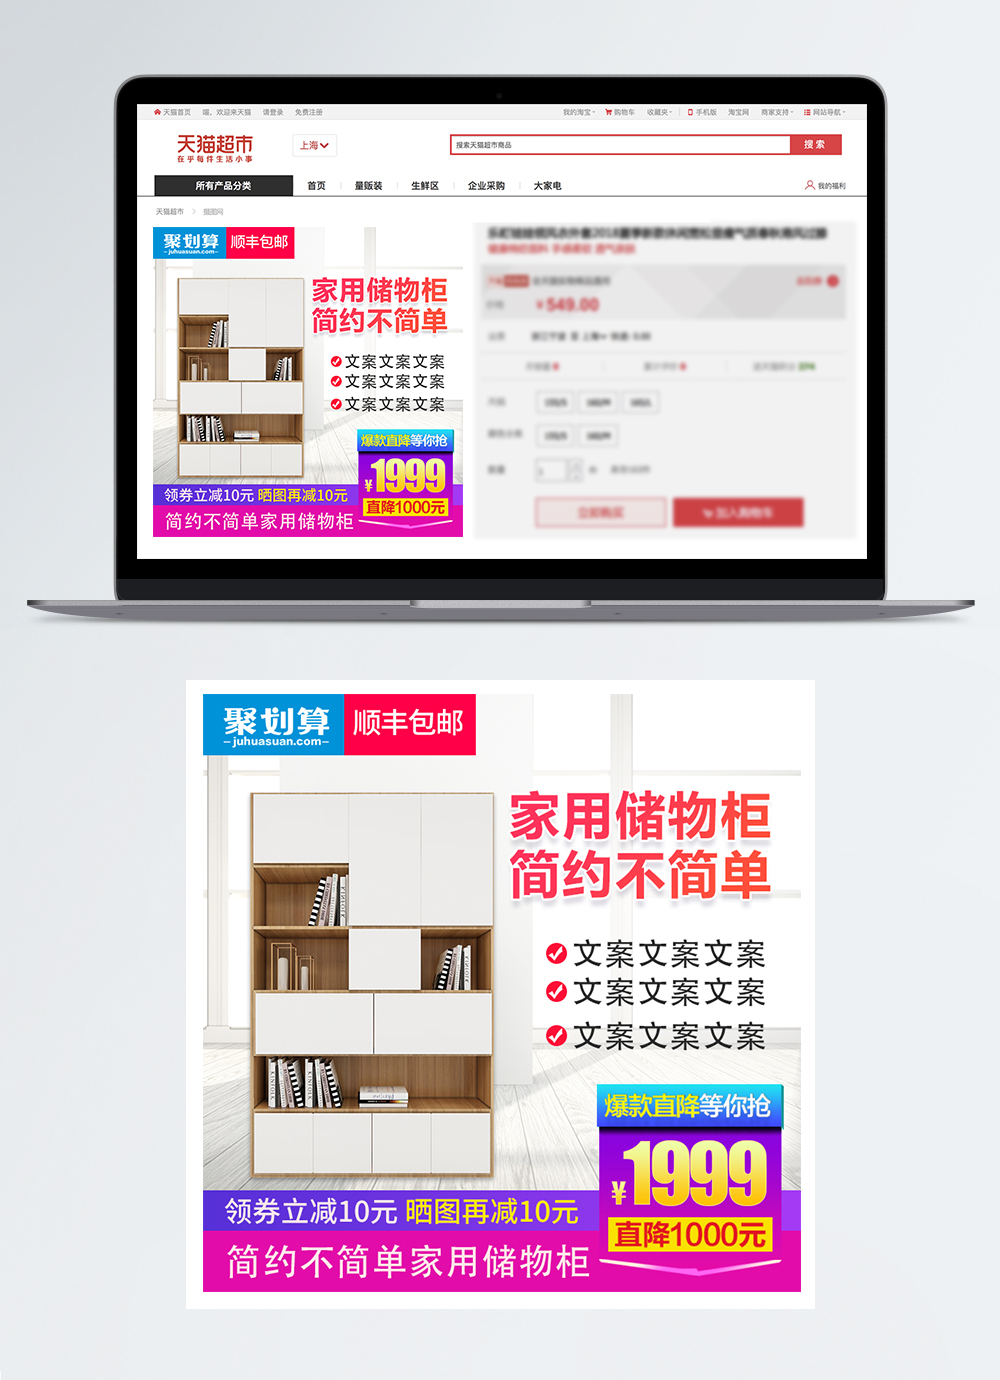 Main Map Of Taobao In Cabinet Promotion Template Image Picture Free Download Lovepik Com